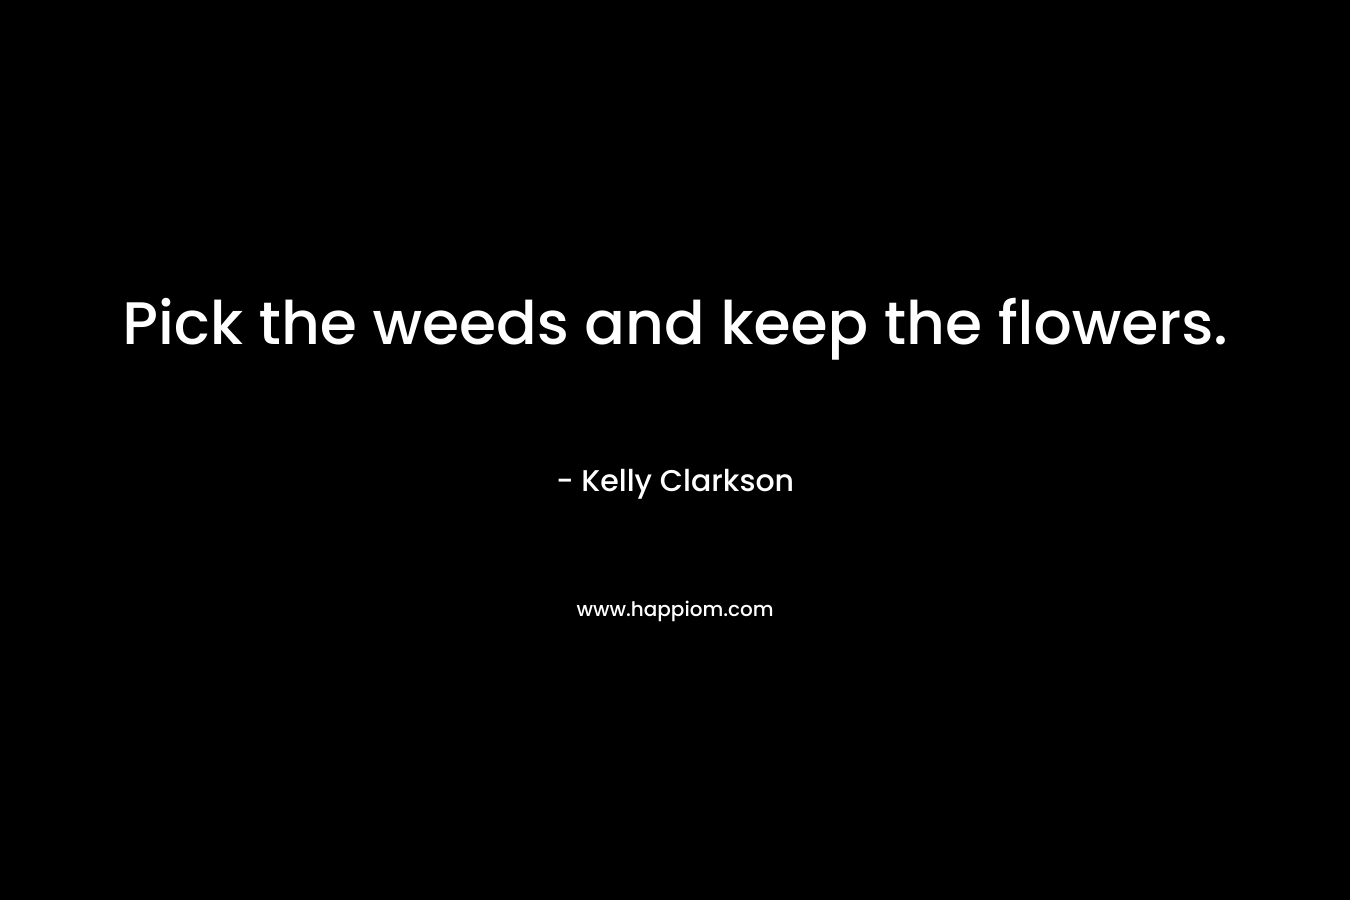 Pick the weeds and keep the flowers. – Kelly Clarkson